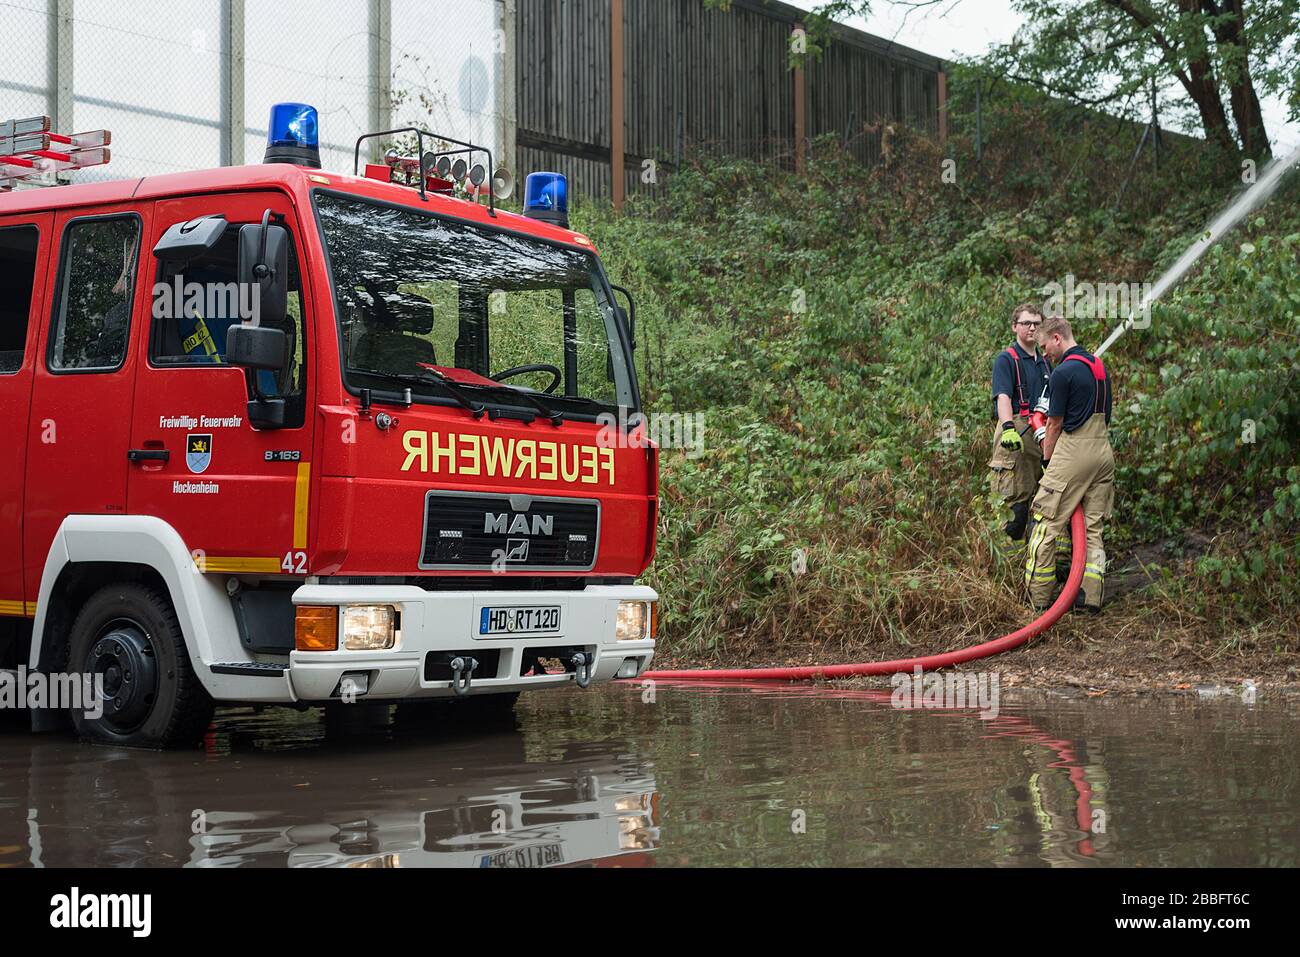 Two emergency services fire personnel assist pumping flood water from a road way with their red fire trucks powerful pumps. Stock Photo